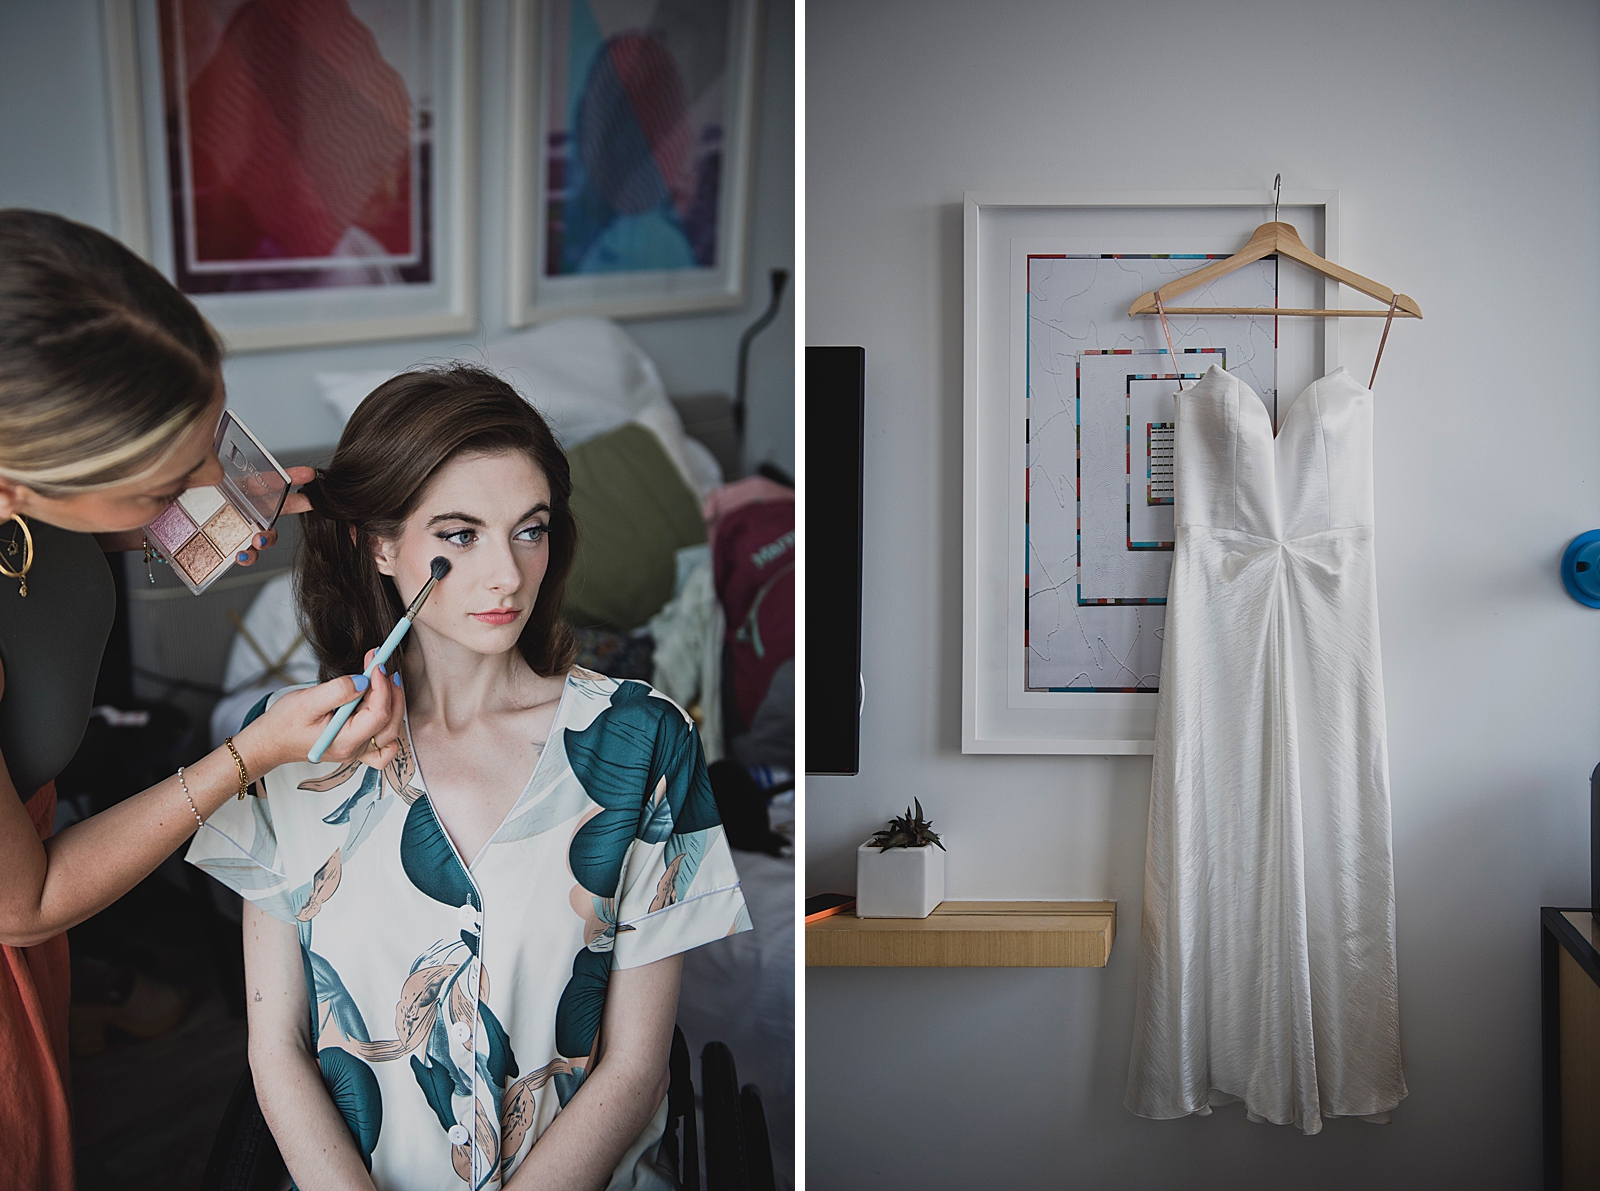 Left photo: Close up shot of the bride getting her make up done. 
Right photo: Shot of the bride's wedding dress.